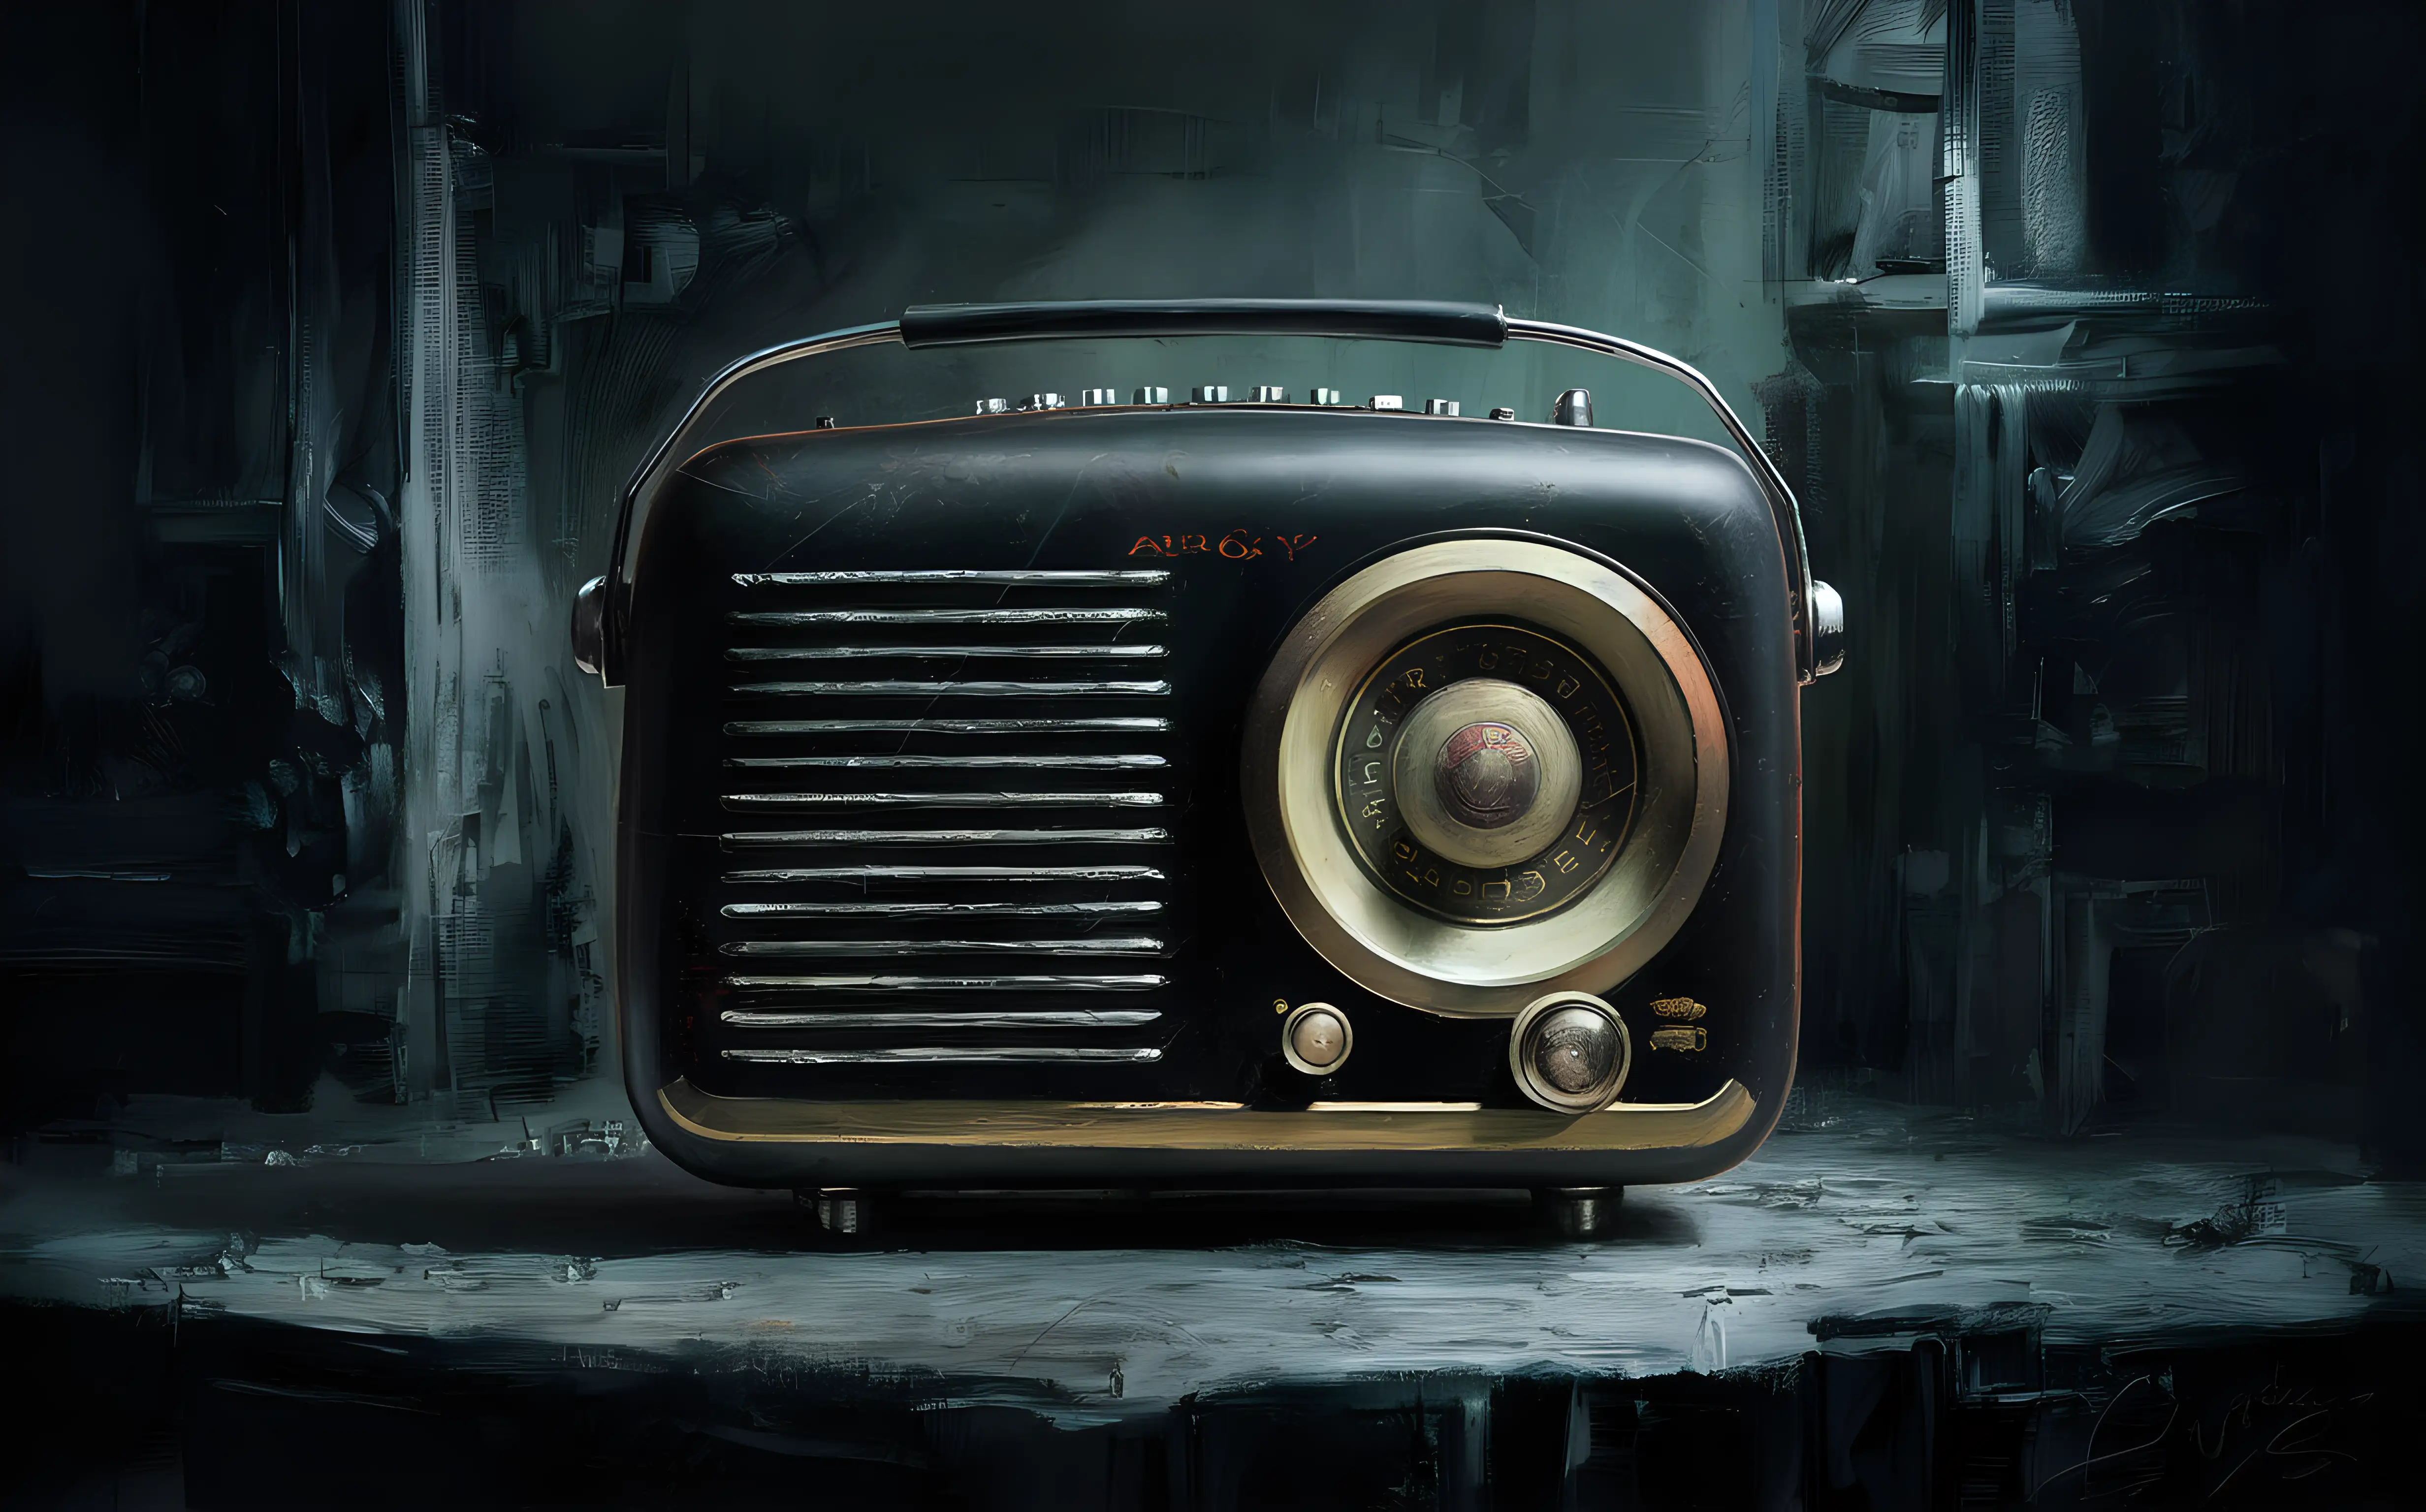 Vintage Radio Painting in the Style of Arshile Gorky on Dark Background